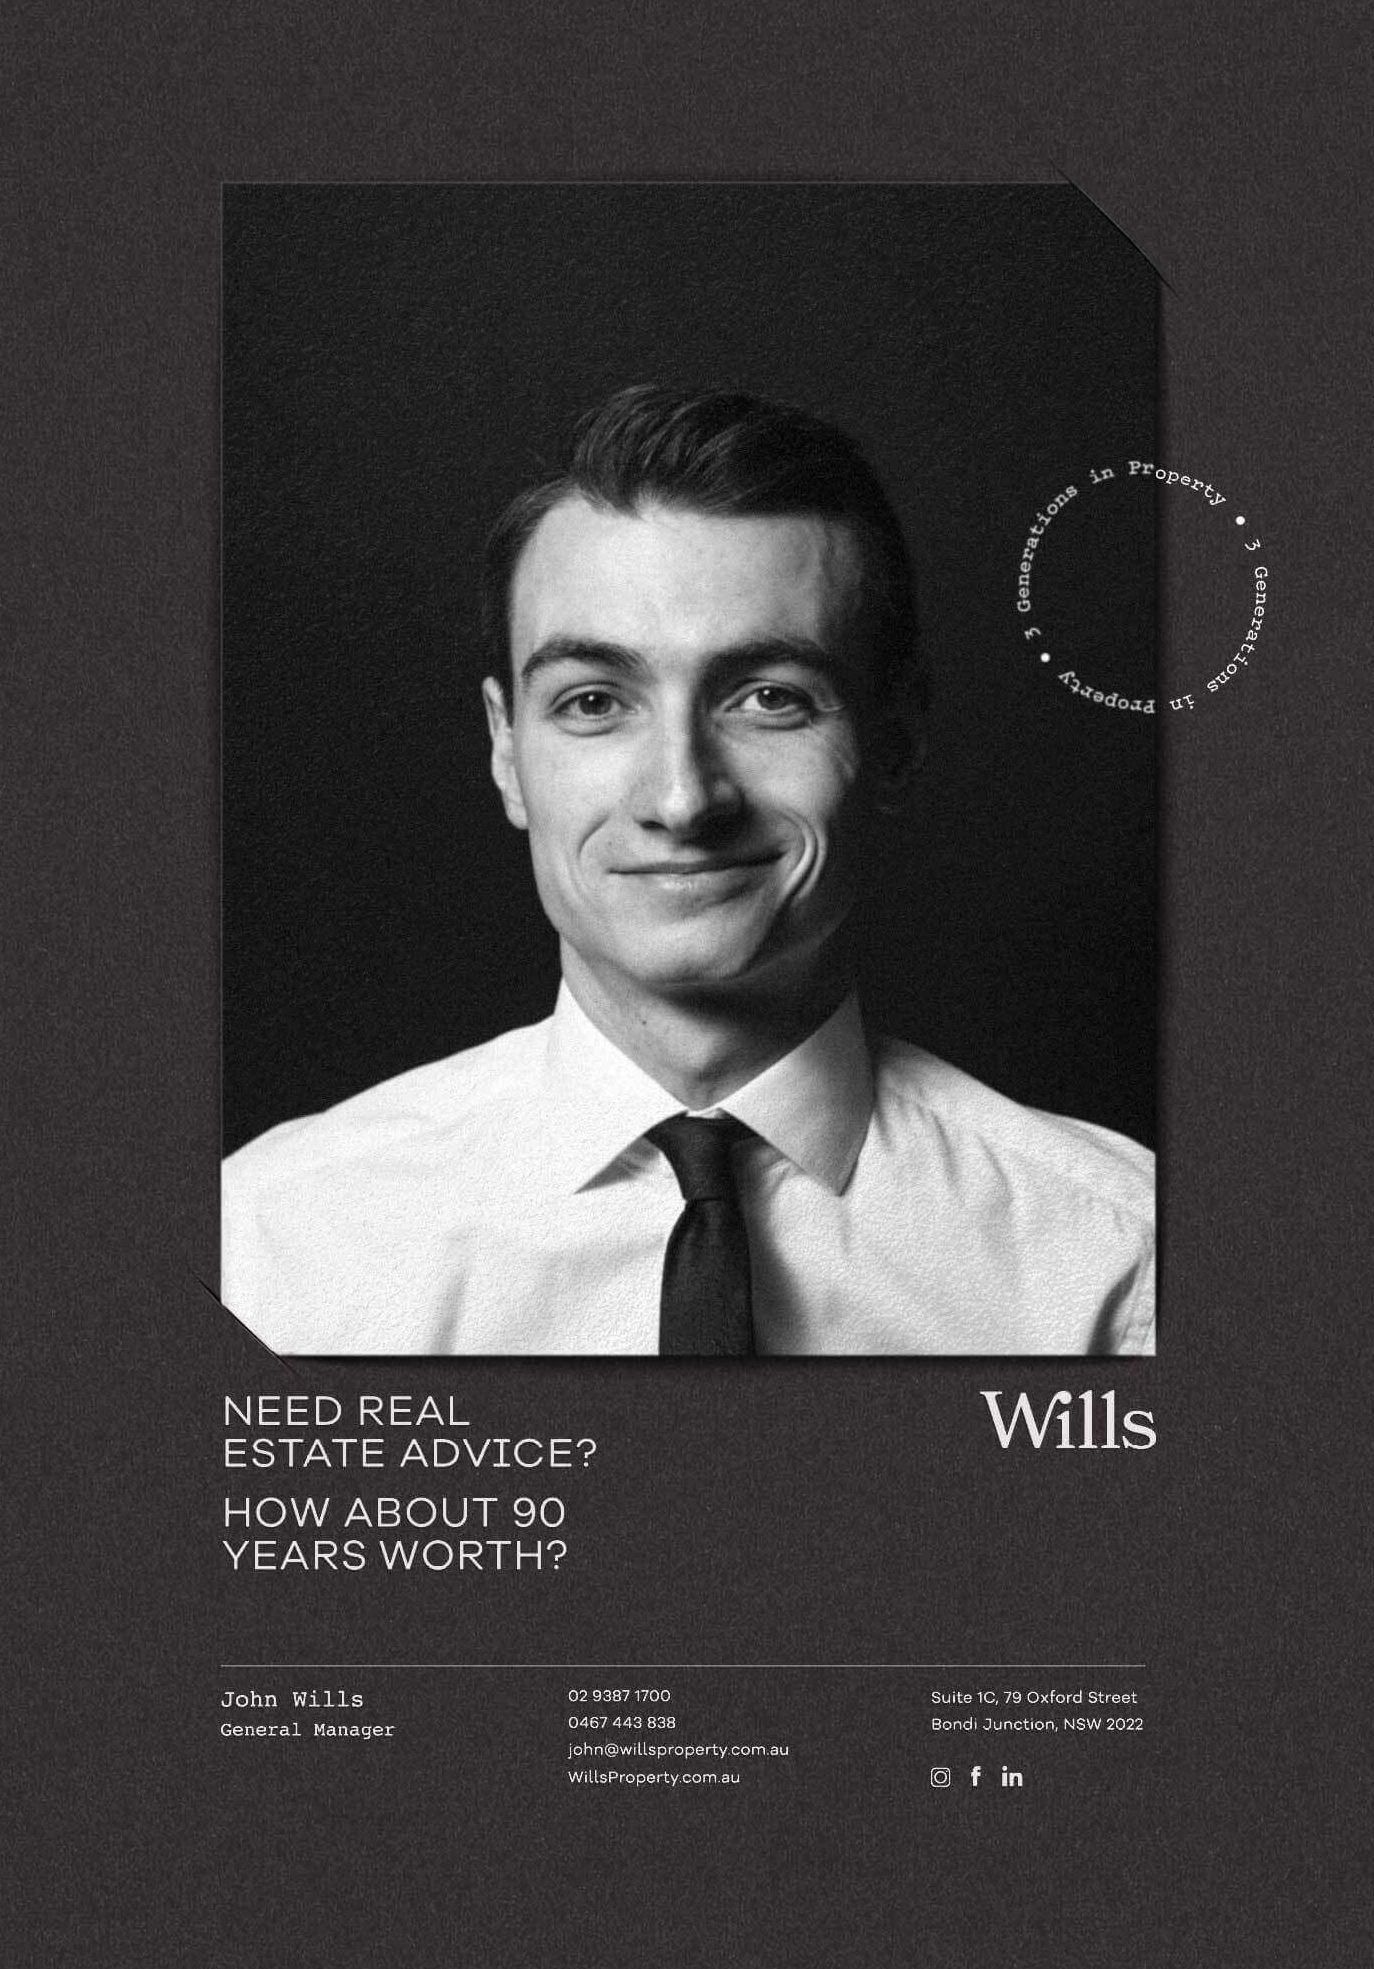 Wills Property - Real Estate Agent Flyer Brand & Website | Atollon - a design company